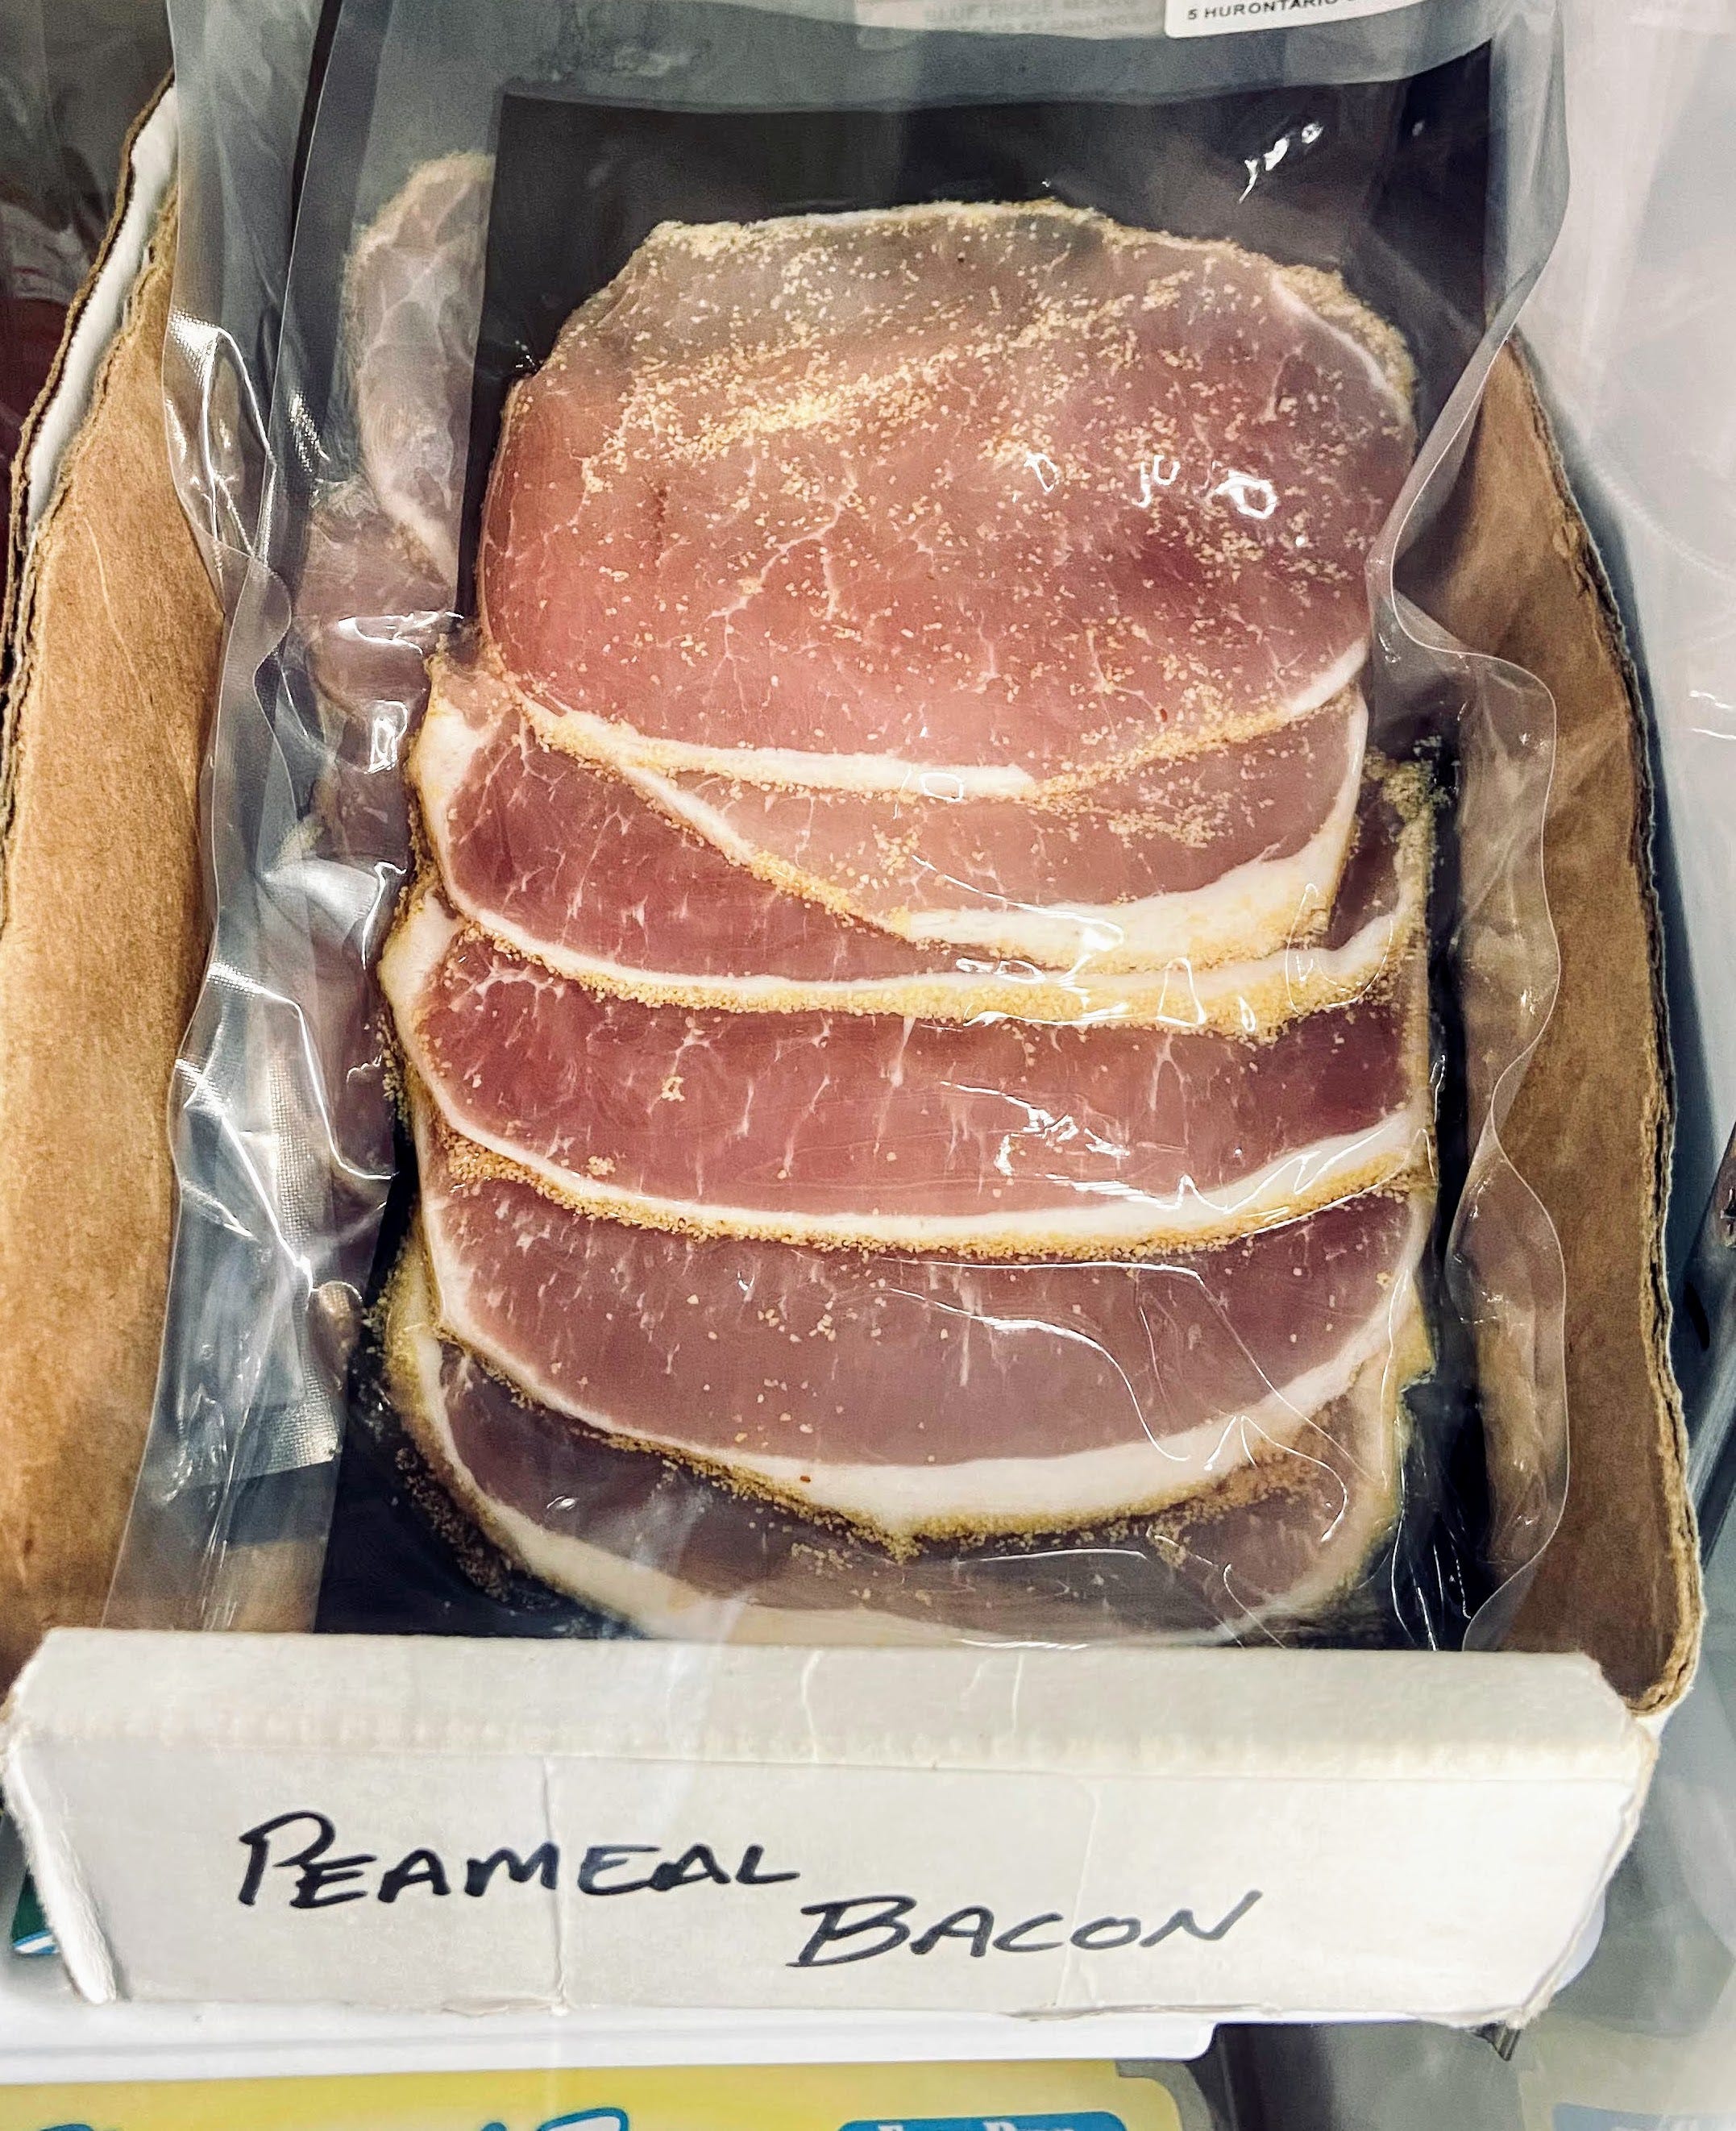 sealed package of peameal bacon in fridge